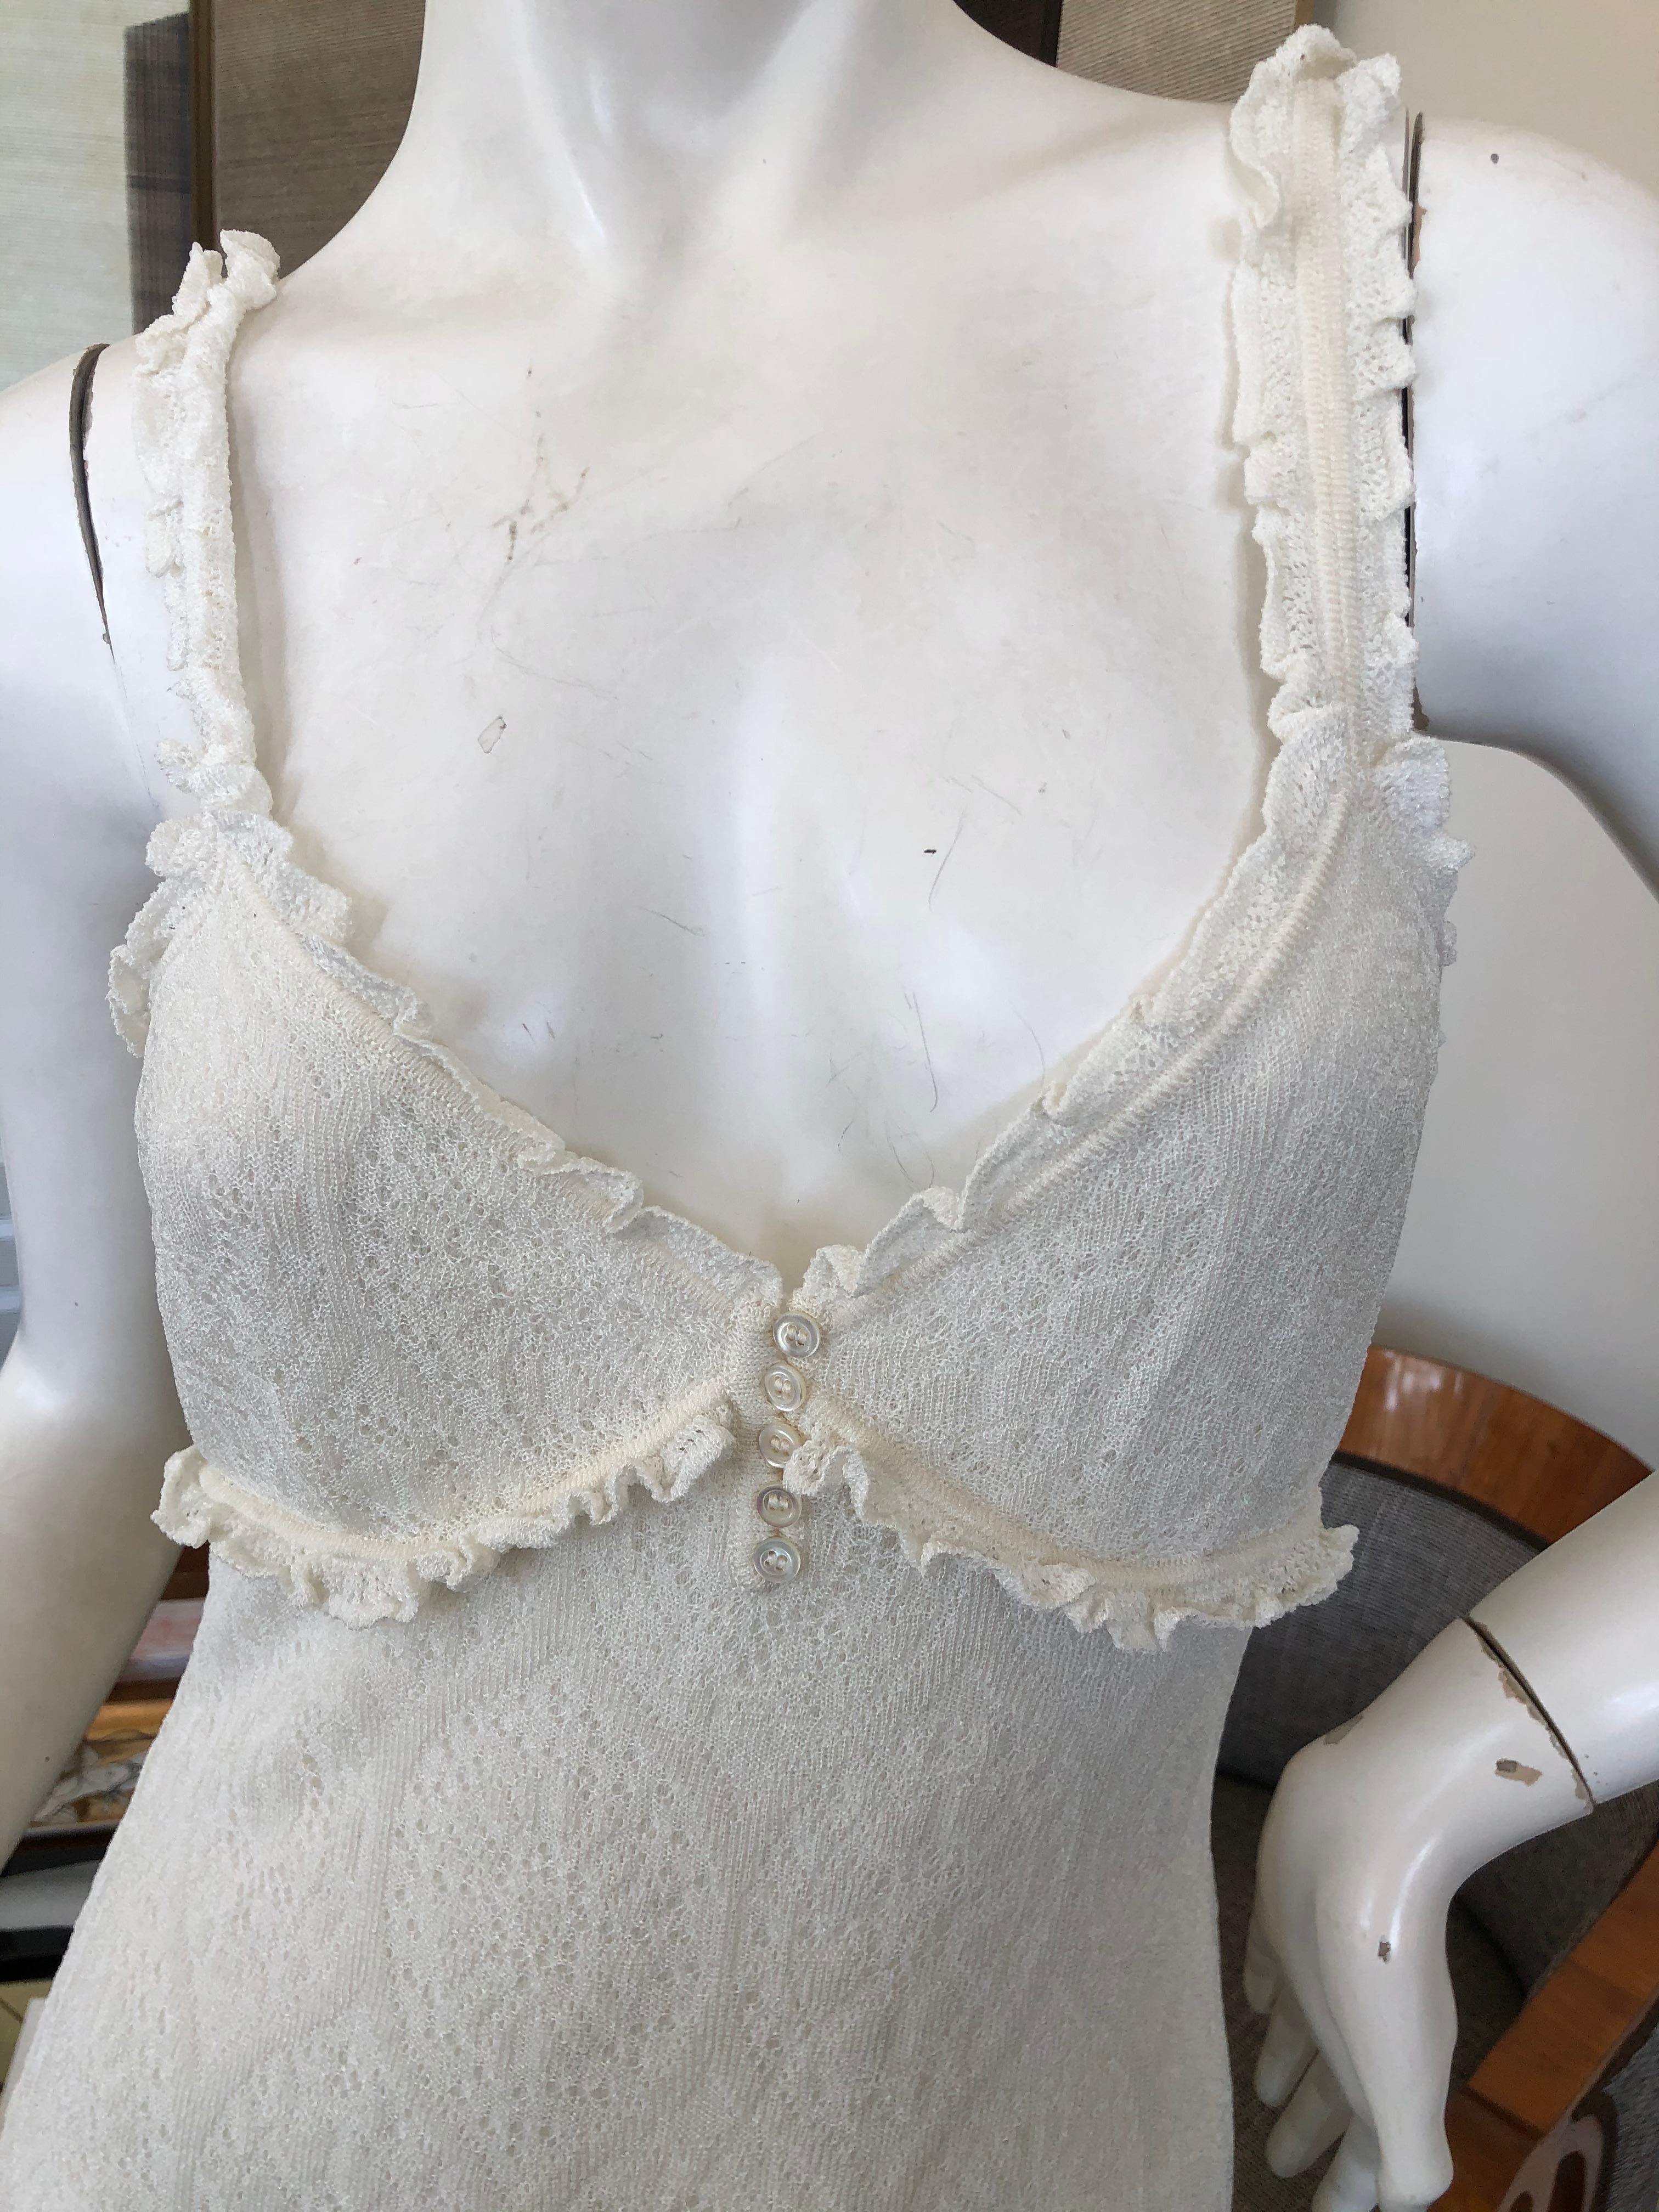 John Galliano 1999 Ivory Pattern Knit Dress with Ruffled Flounce Hem In Good Condition For Sale In Cloverdale, CA